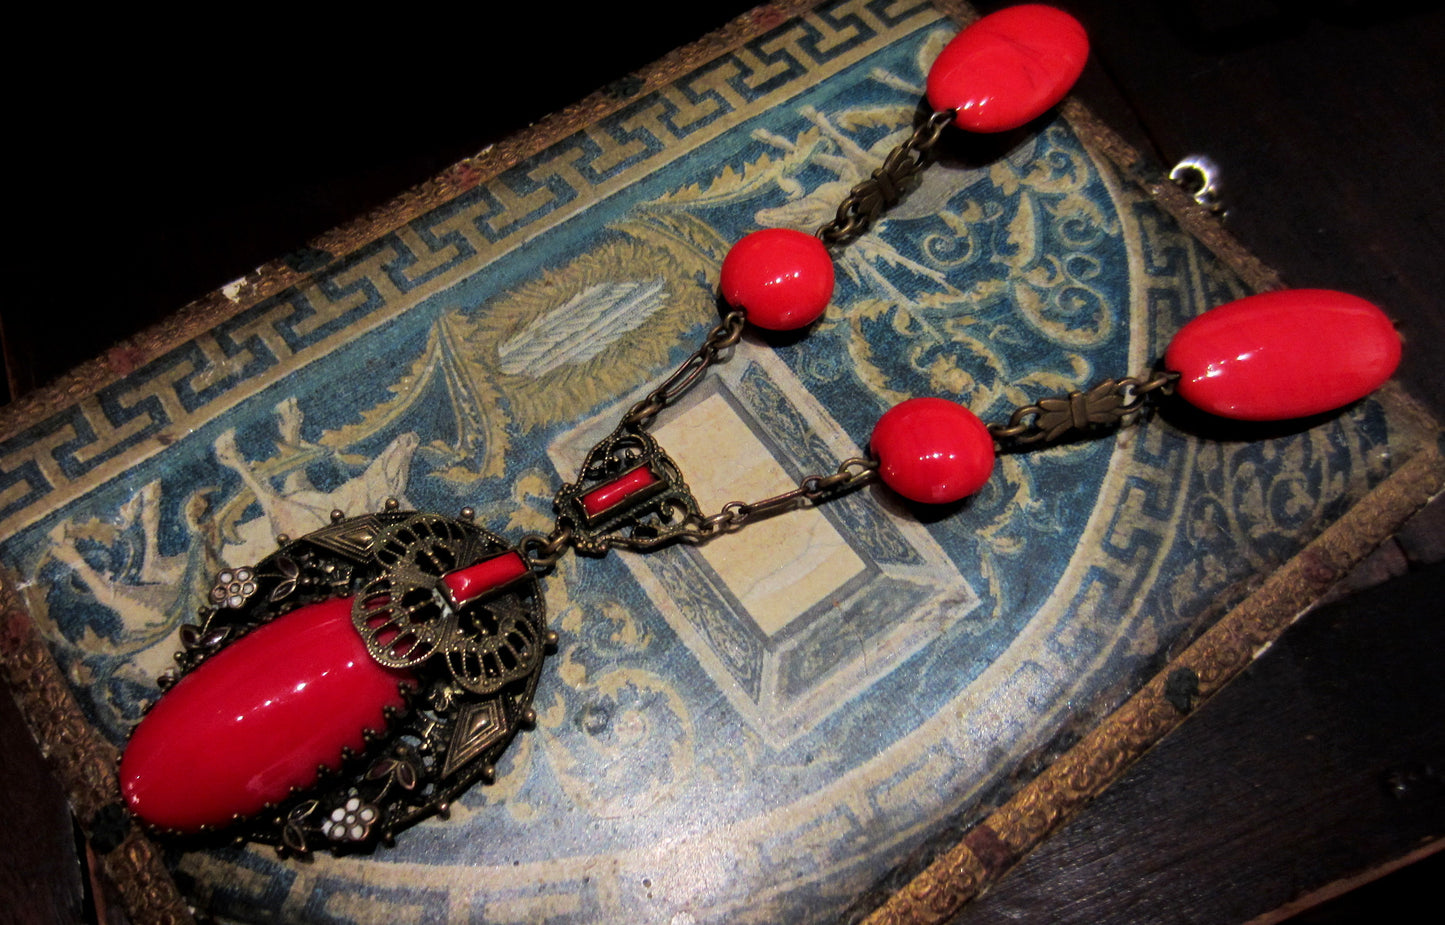 SOLD--Art Deco Red Glass and Enamel Necklace Brass, Czech c. 1930